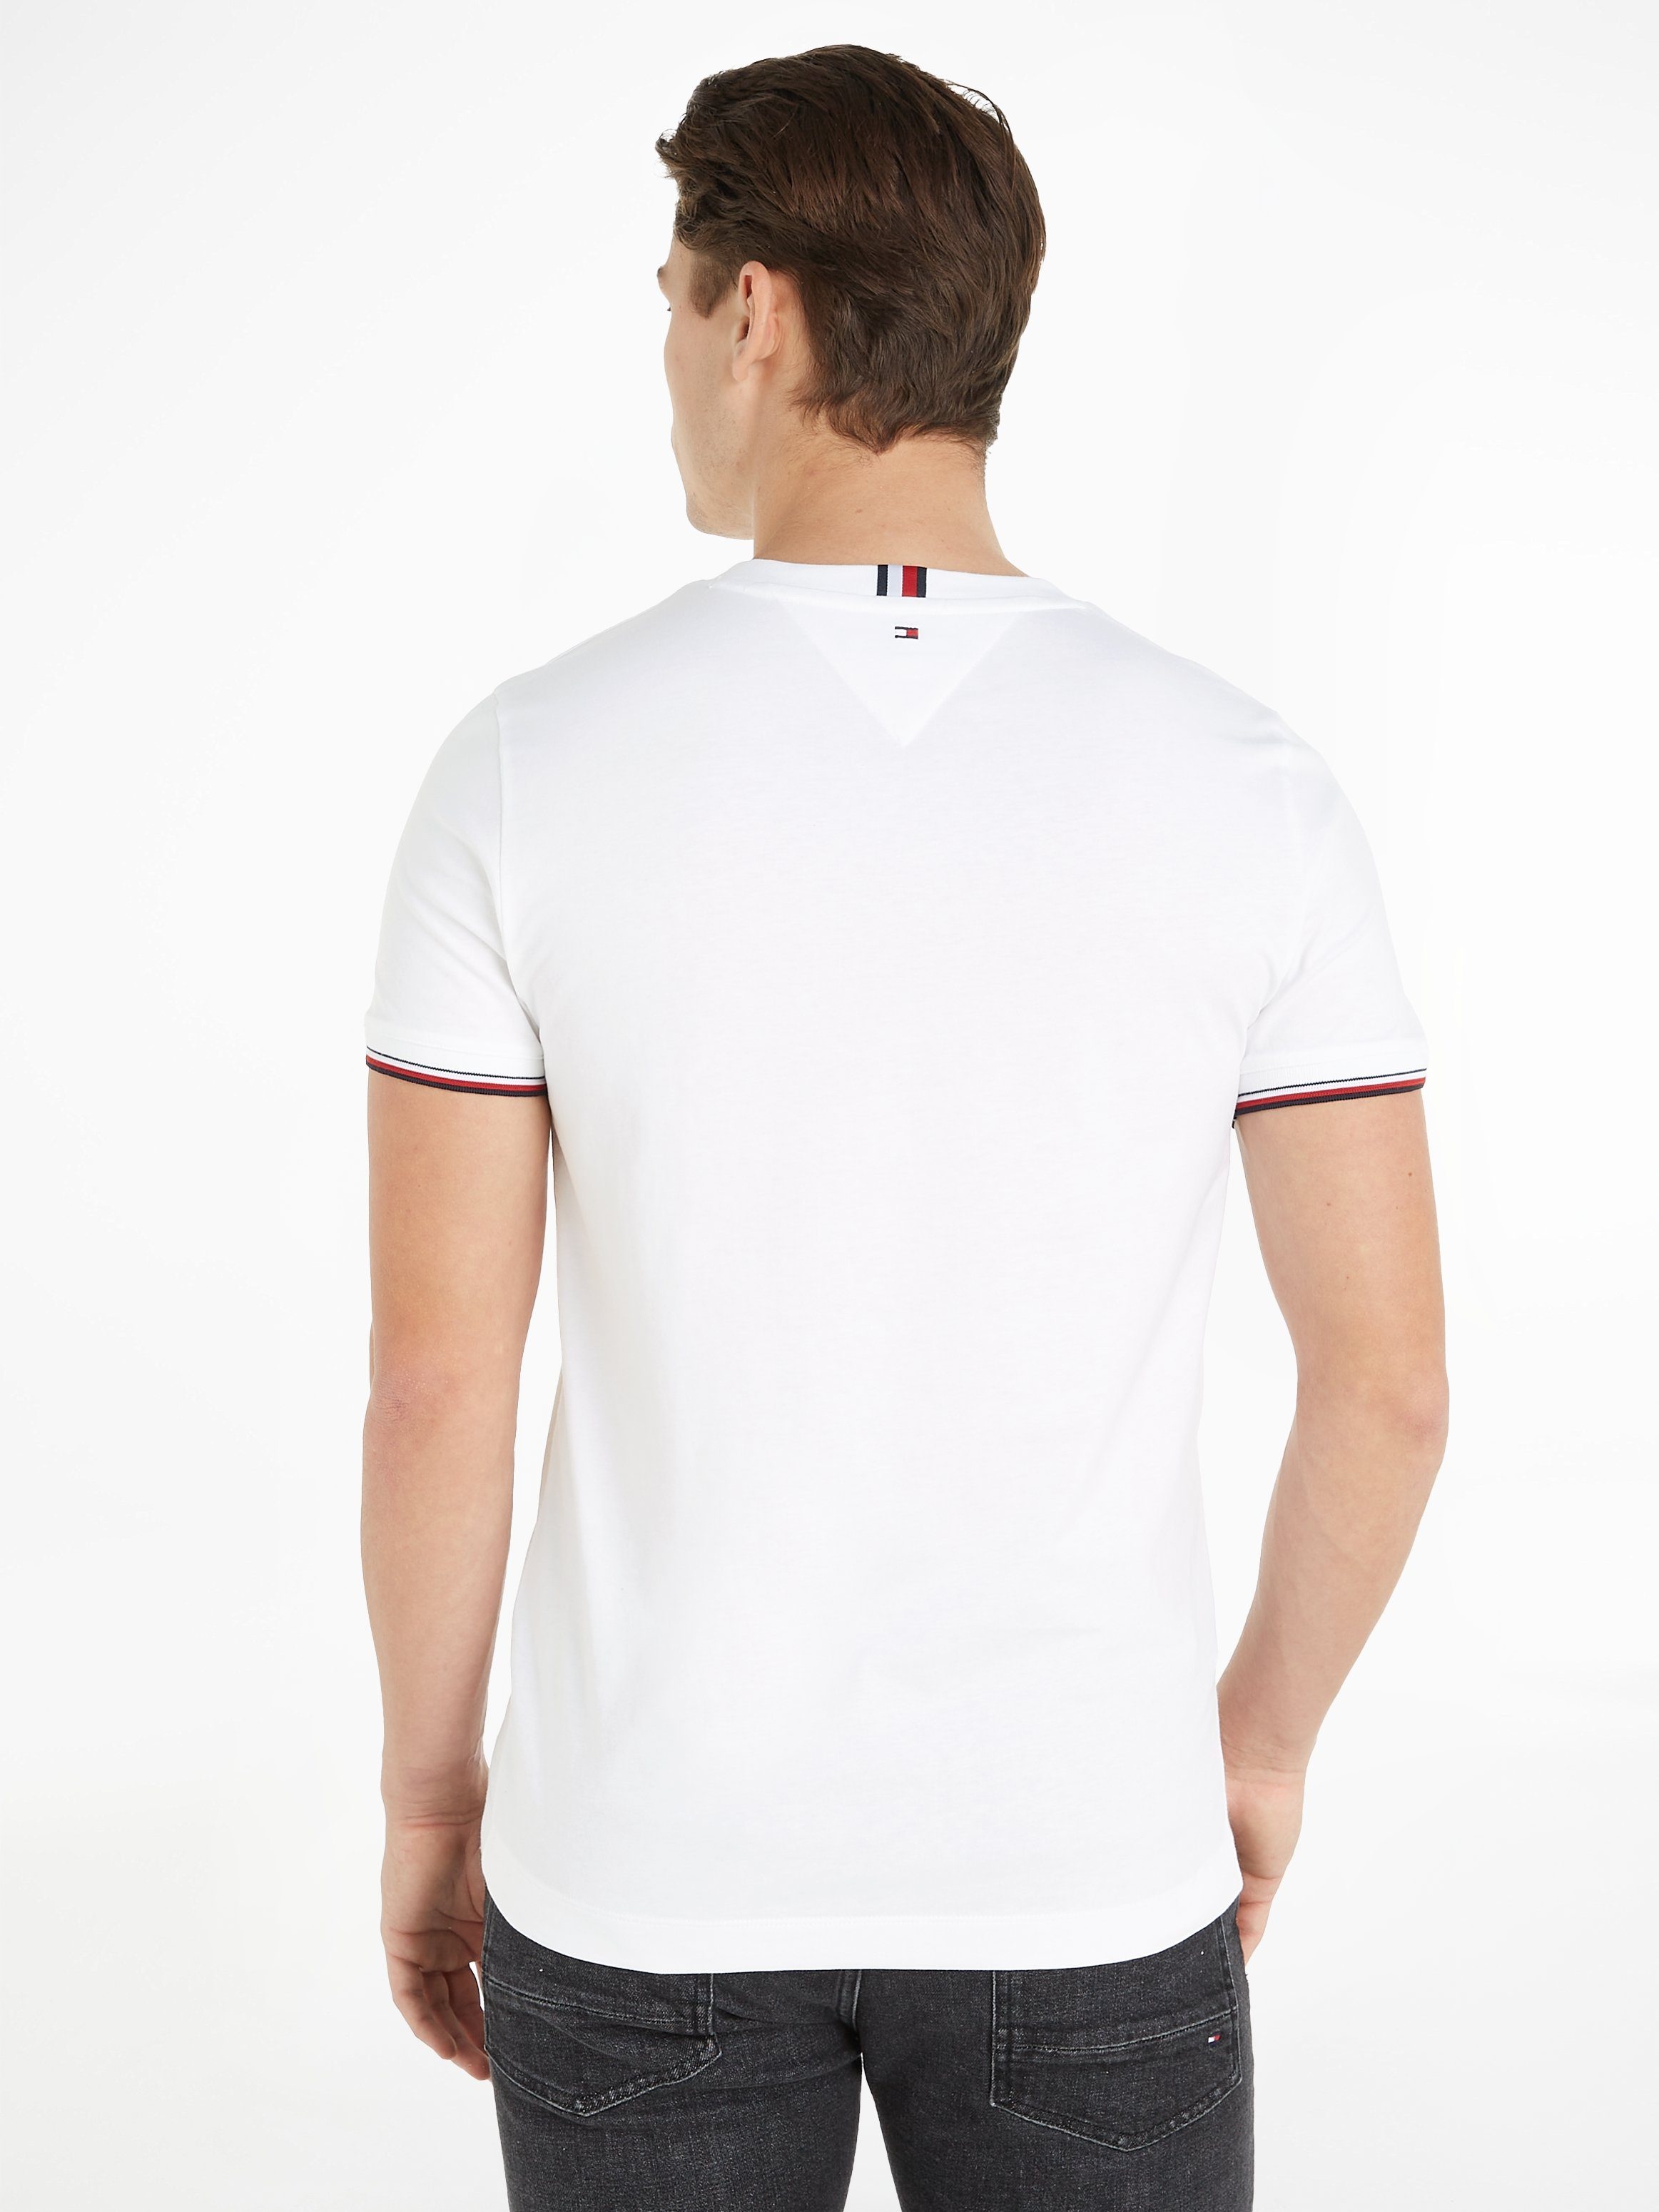 Tommy Hilfiger T-Shirt TOMMY LOGO TIPPED White TEE